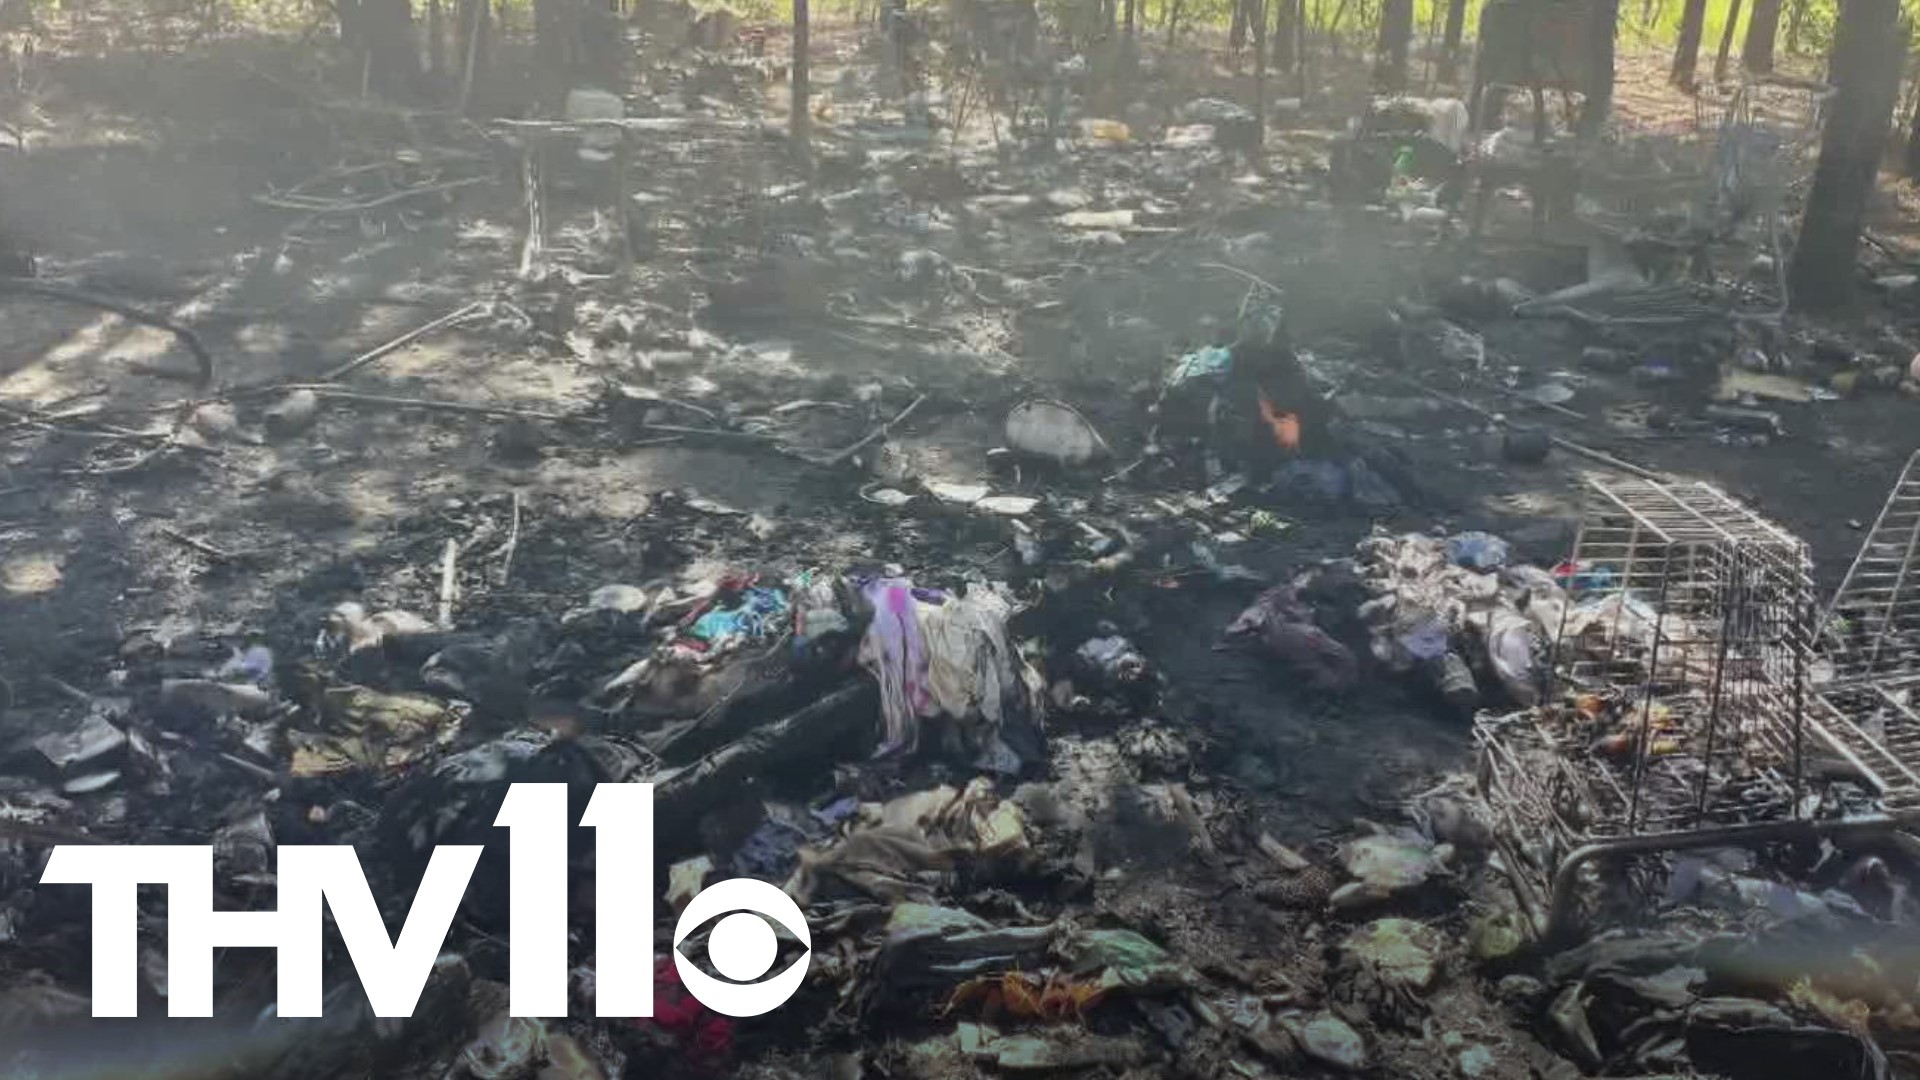 Late Tuesday night a fire broke out at an unsheltered camp in southwest Little Rock. Now, volunteers in the community are helping those that were impacted.